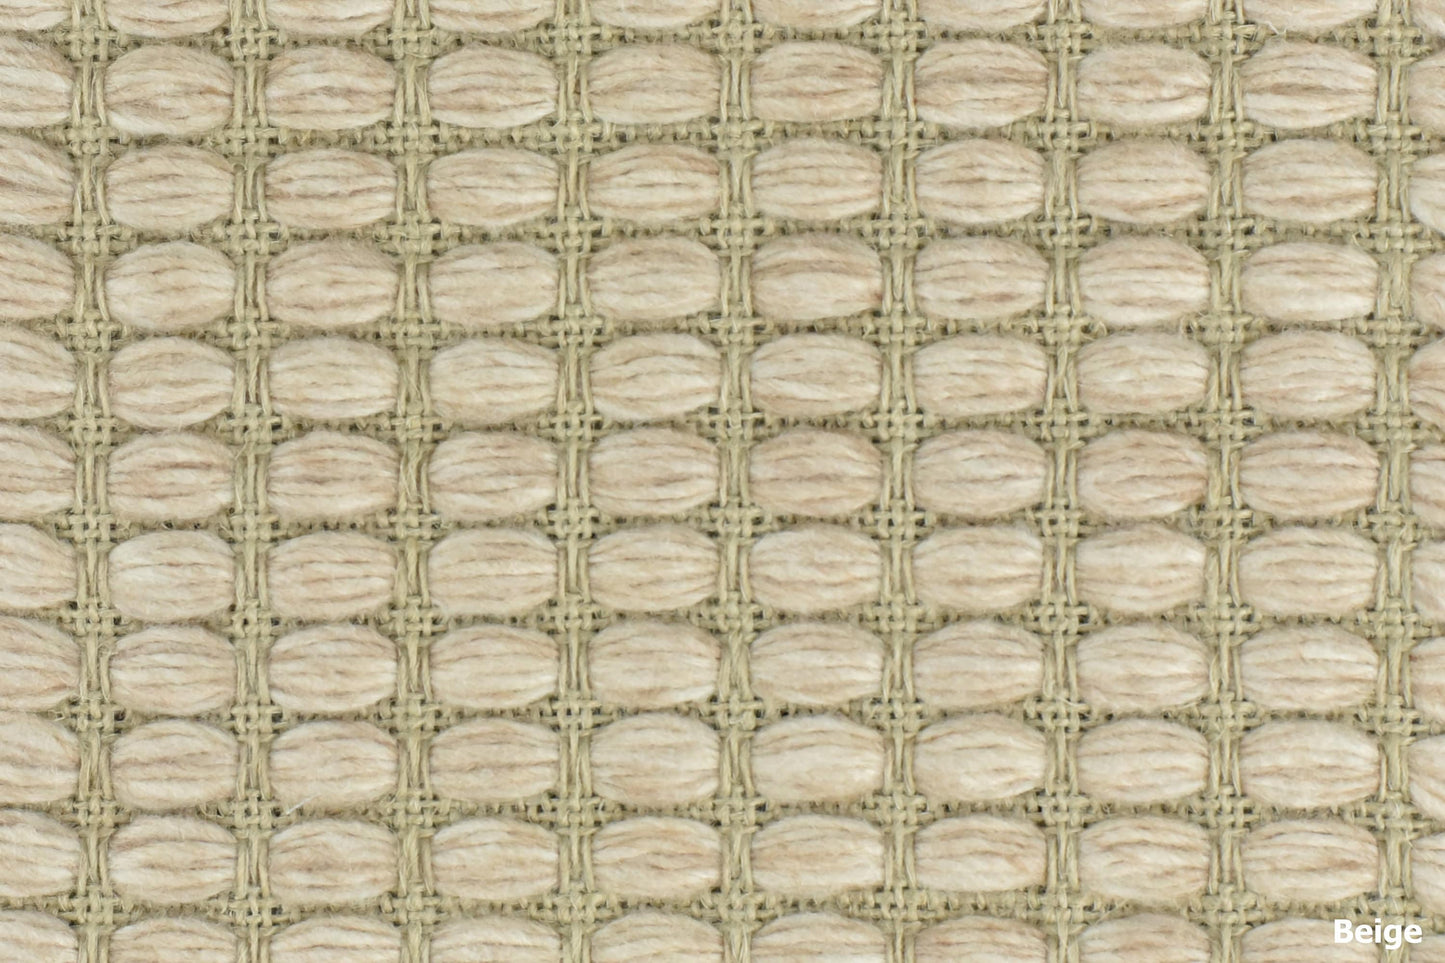 Chunky Woven Contemporary Wool Linen Textured Upholstery Fabric For Home Decor&Decorative Pillow Fabric-56"W/658GSM Beige